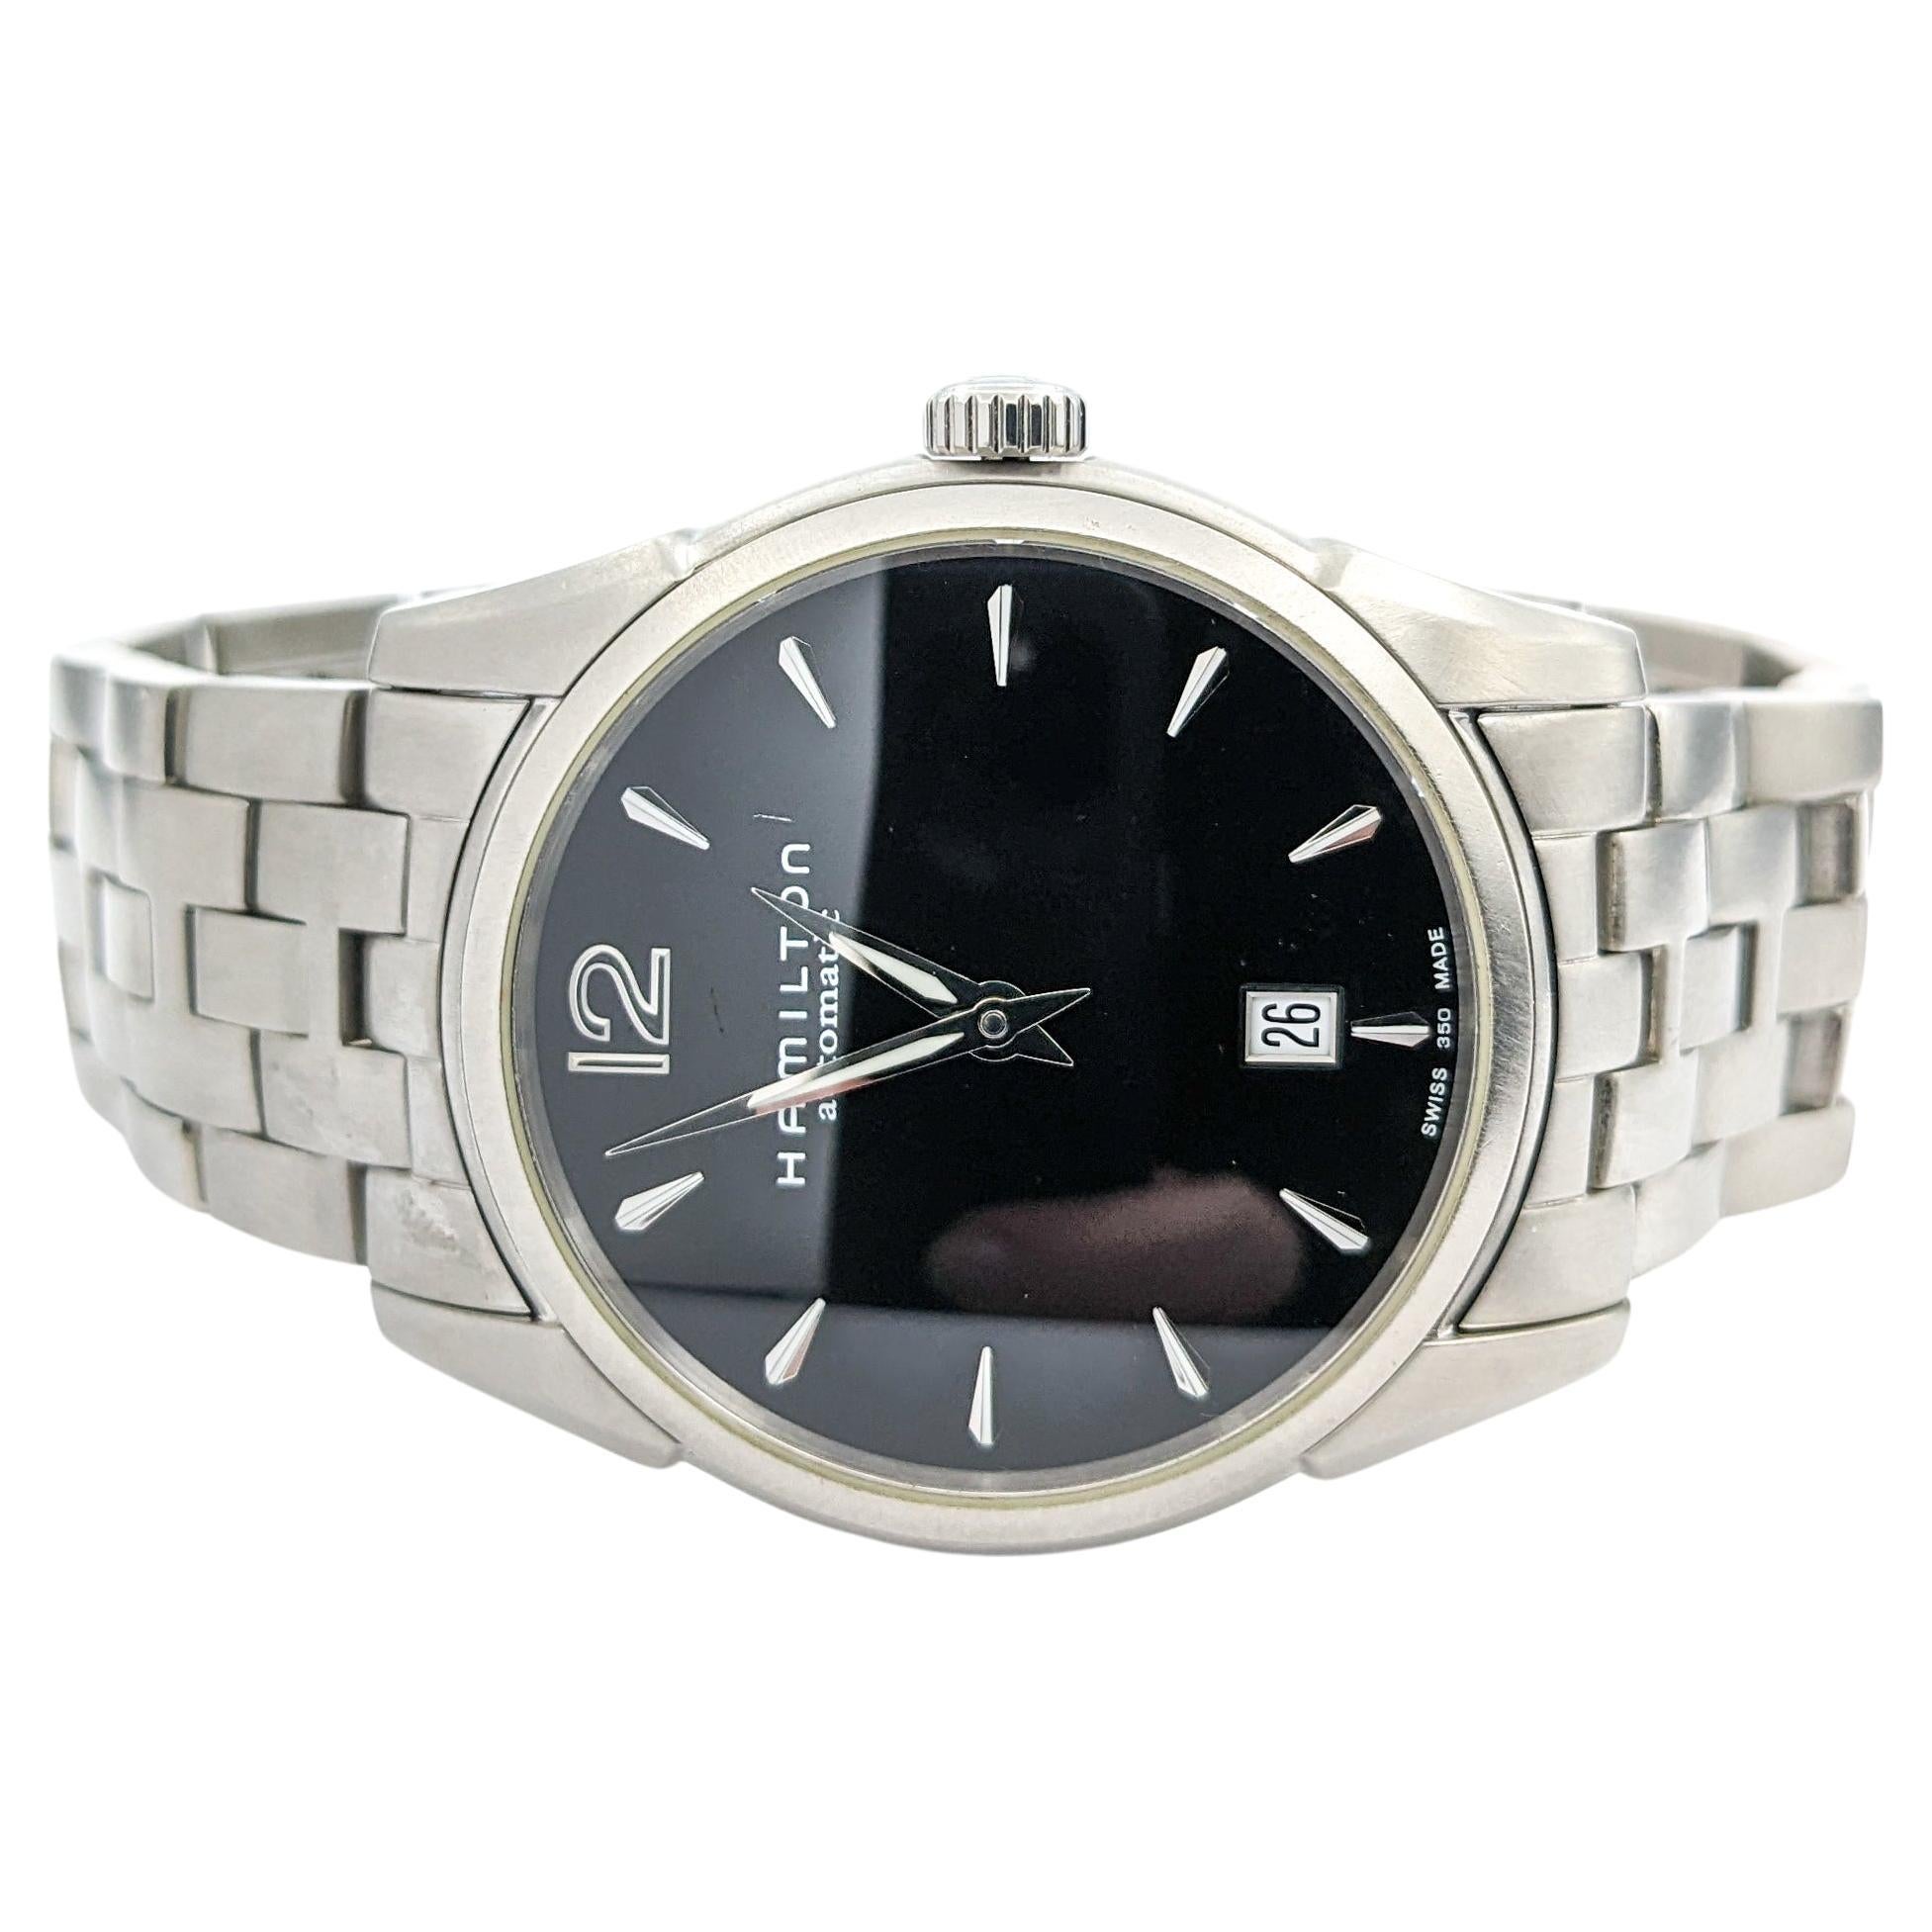 Men's Hamilton Automatic Jazzmaster Slim watch In stainless steel For Sale